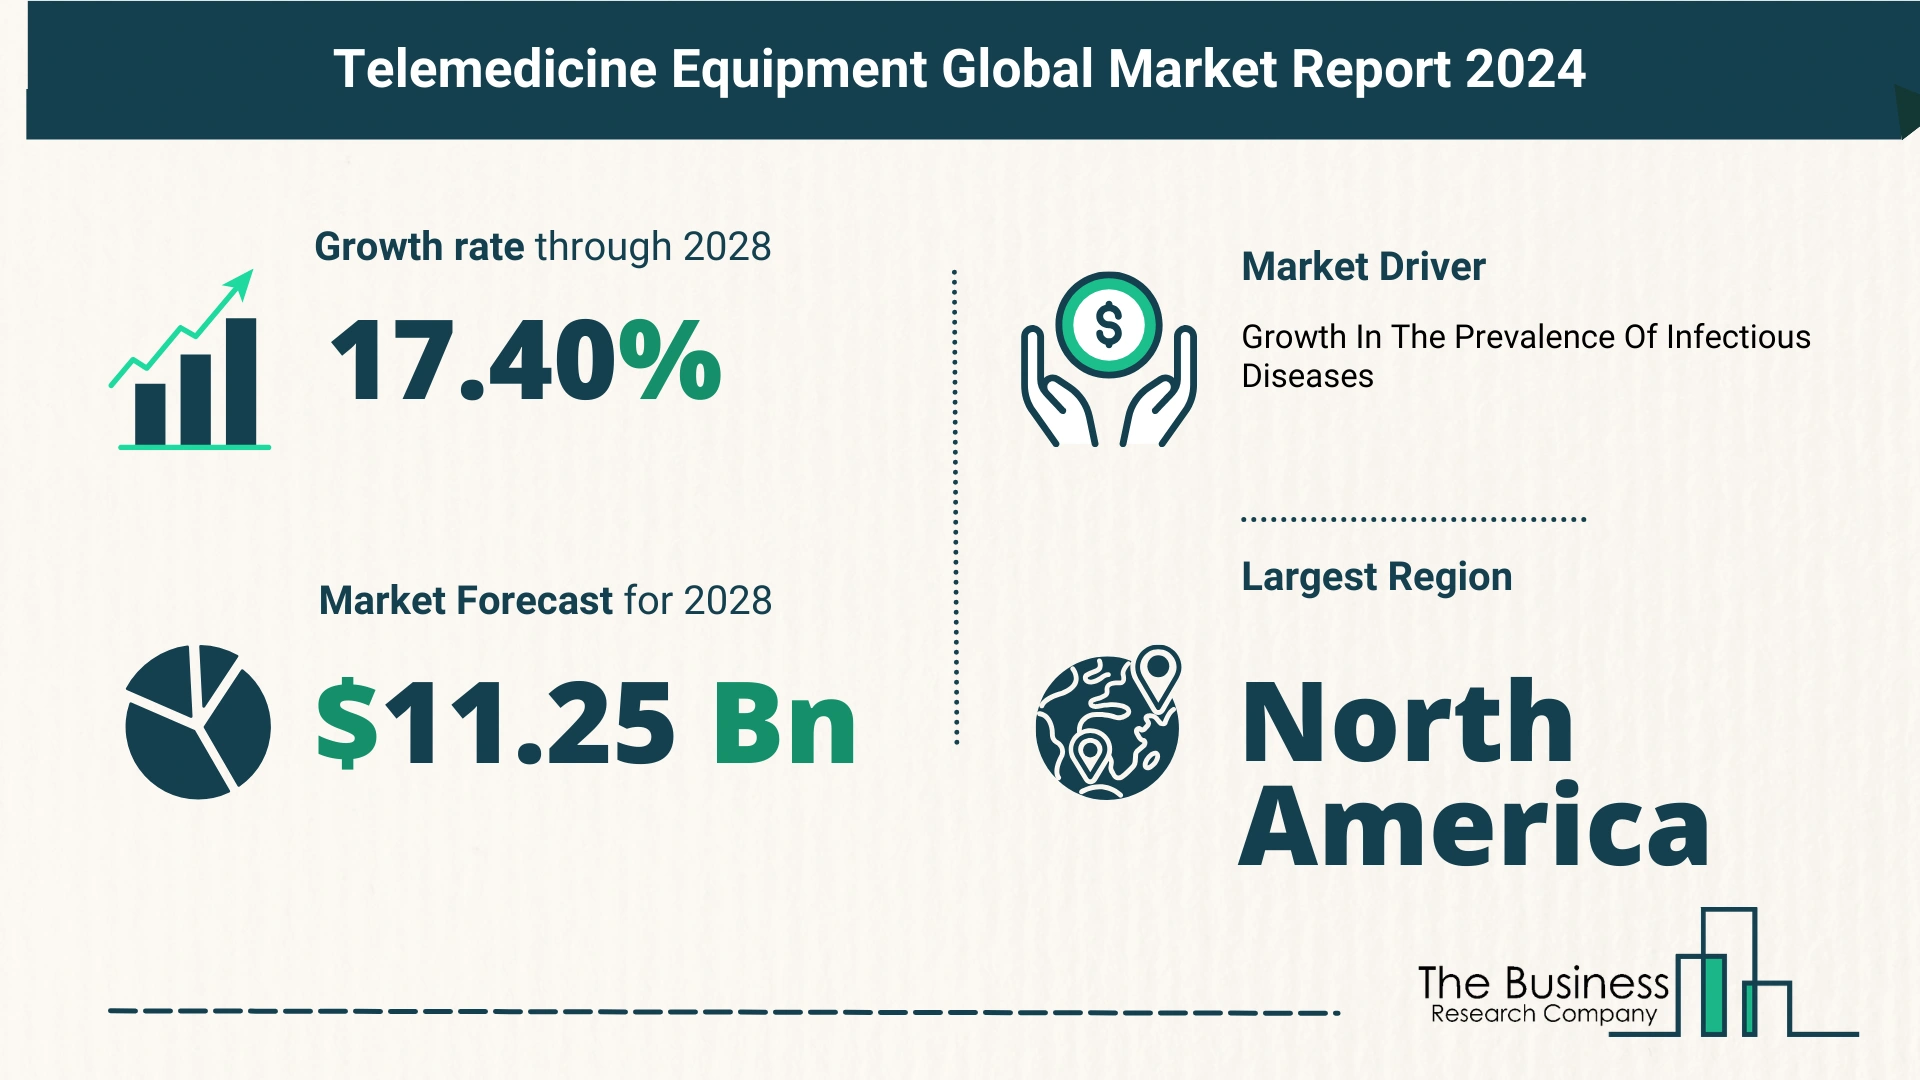 Understand How The Telemedicine Equipment Market Is Poised To Grow Through 2024-2033